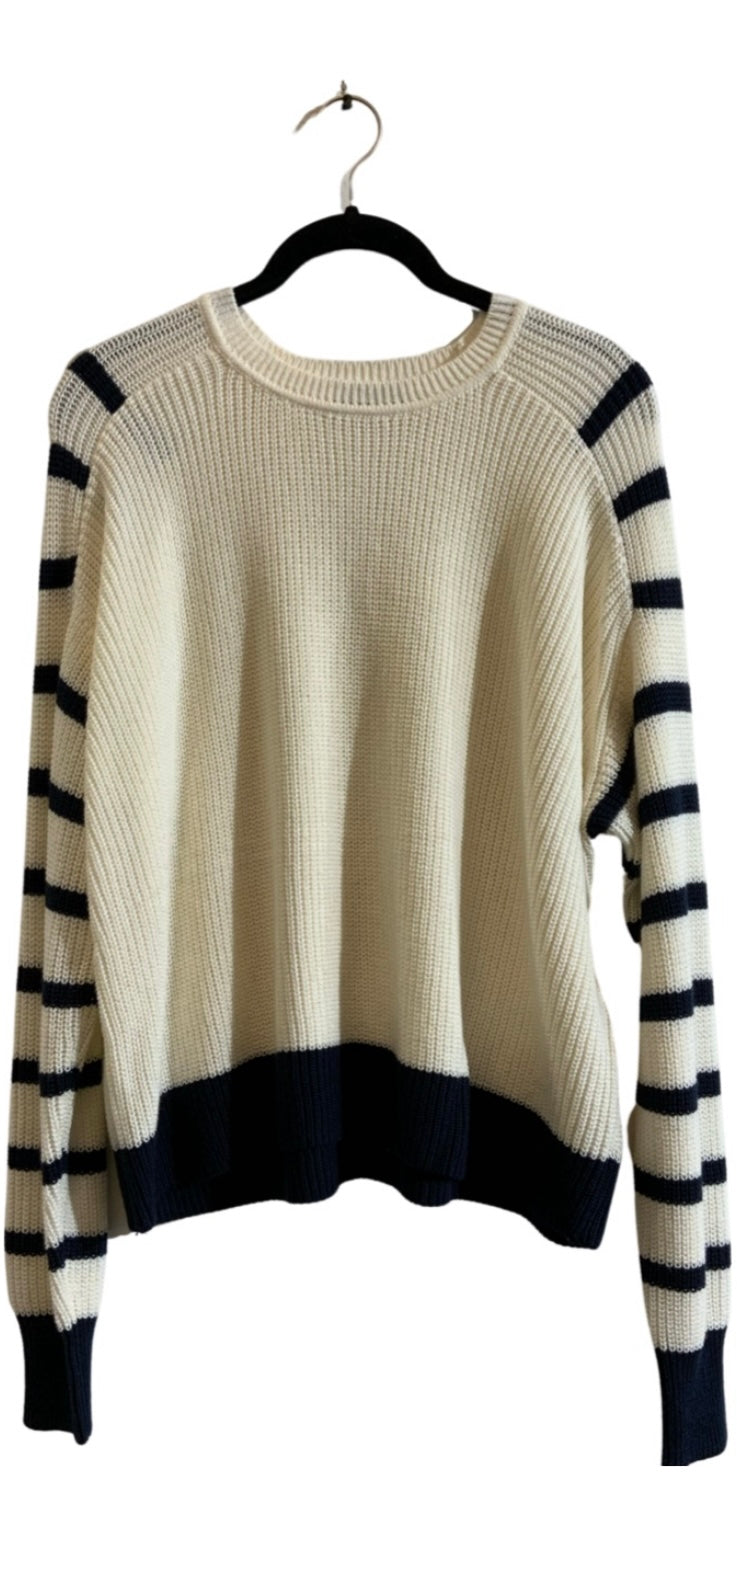 HASSON-Shaker Crew with Striped Sleeves White/Navy